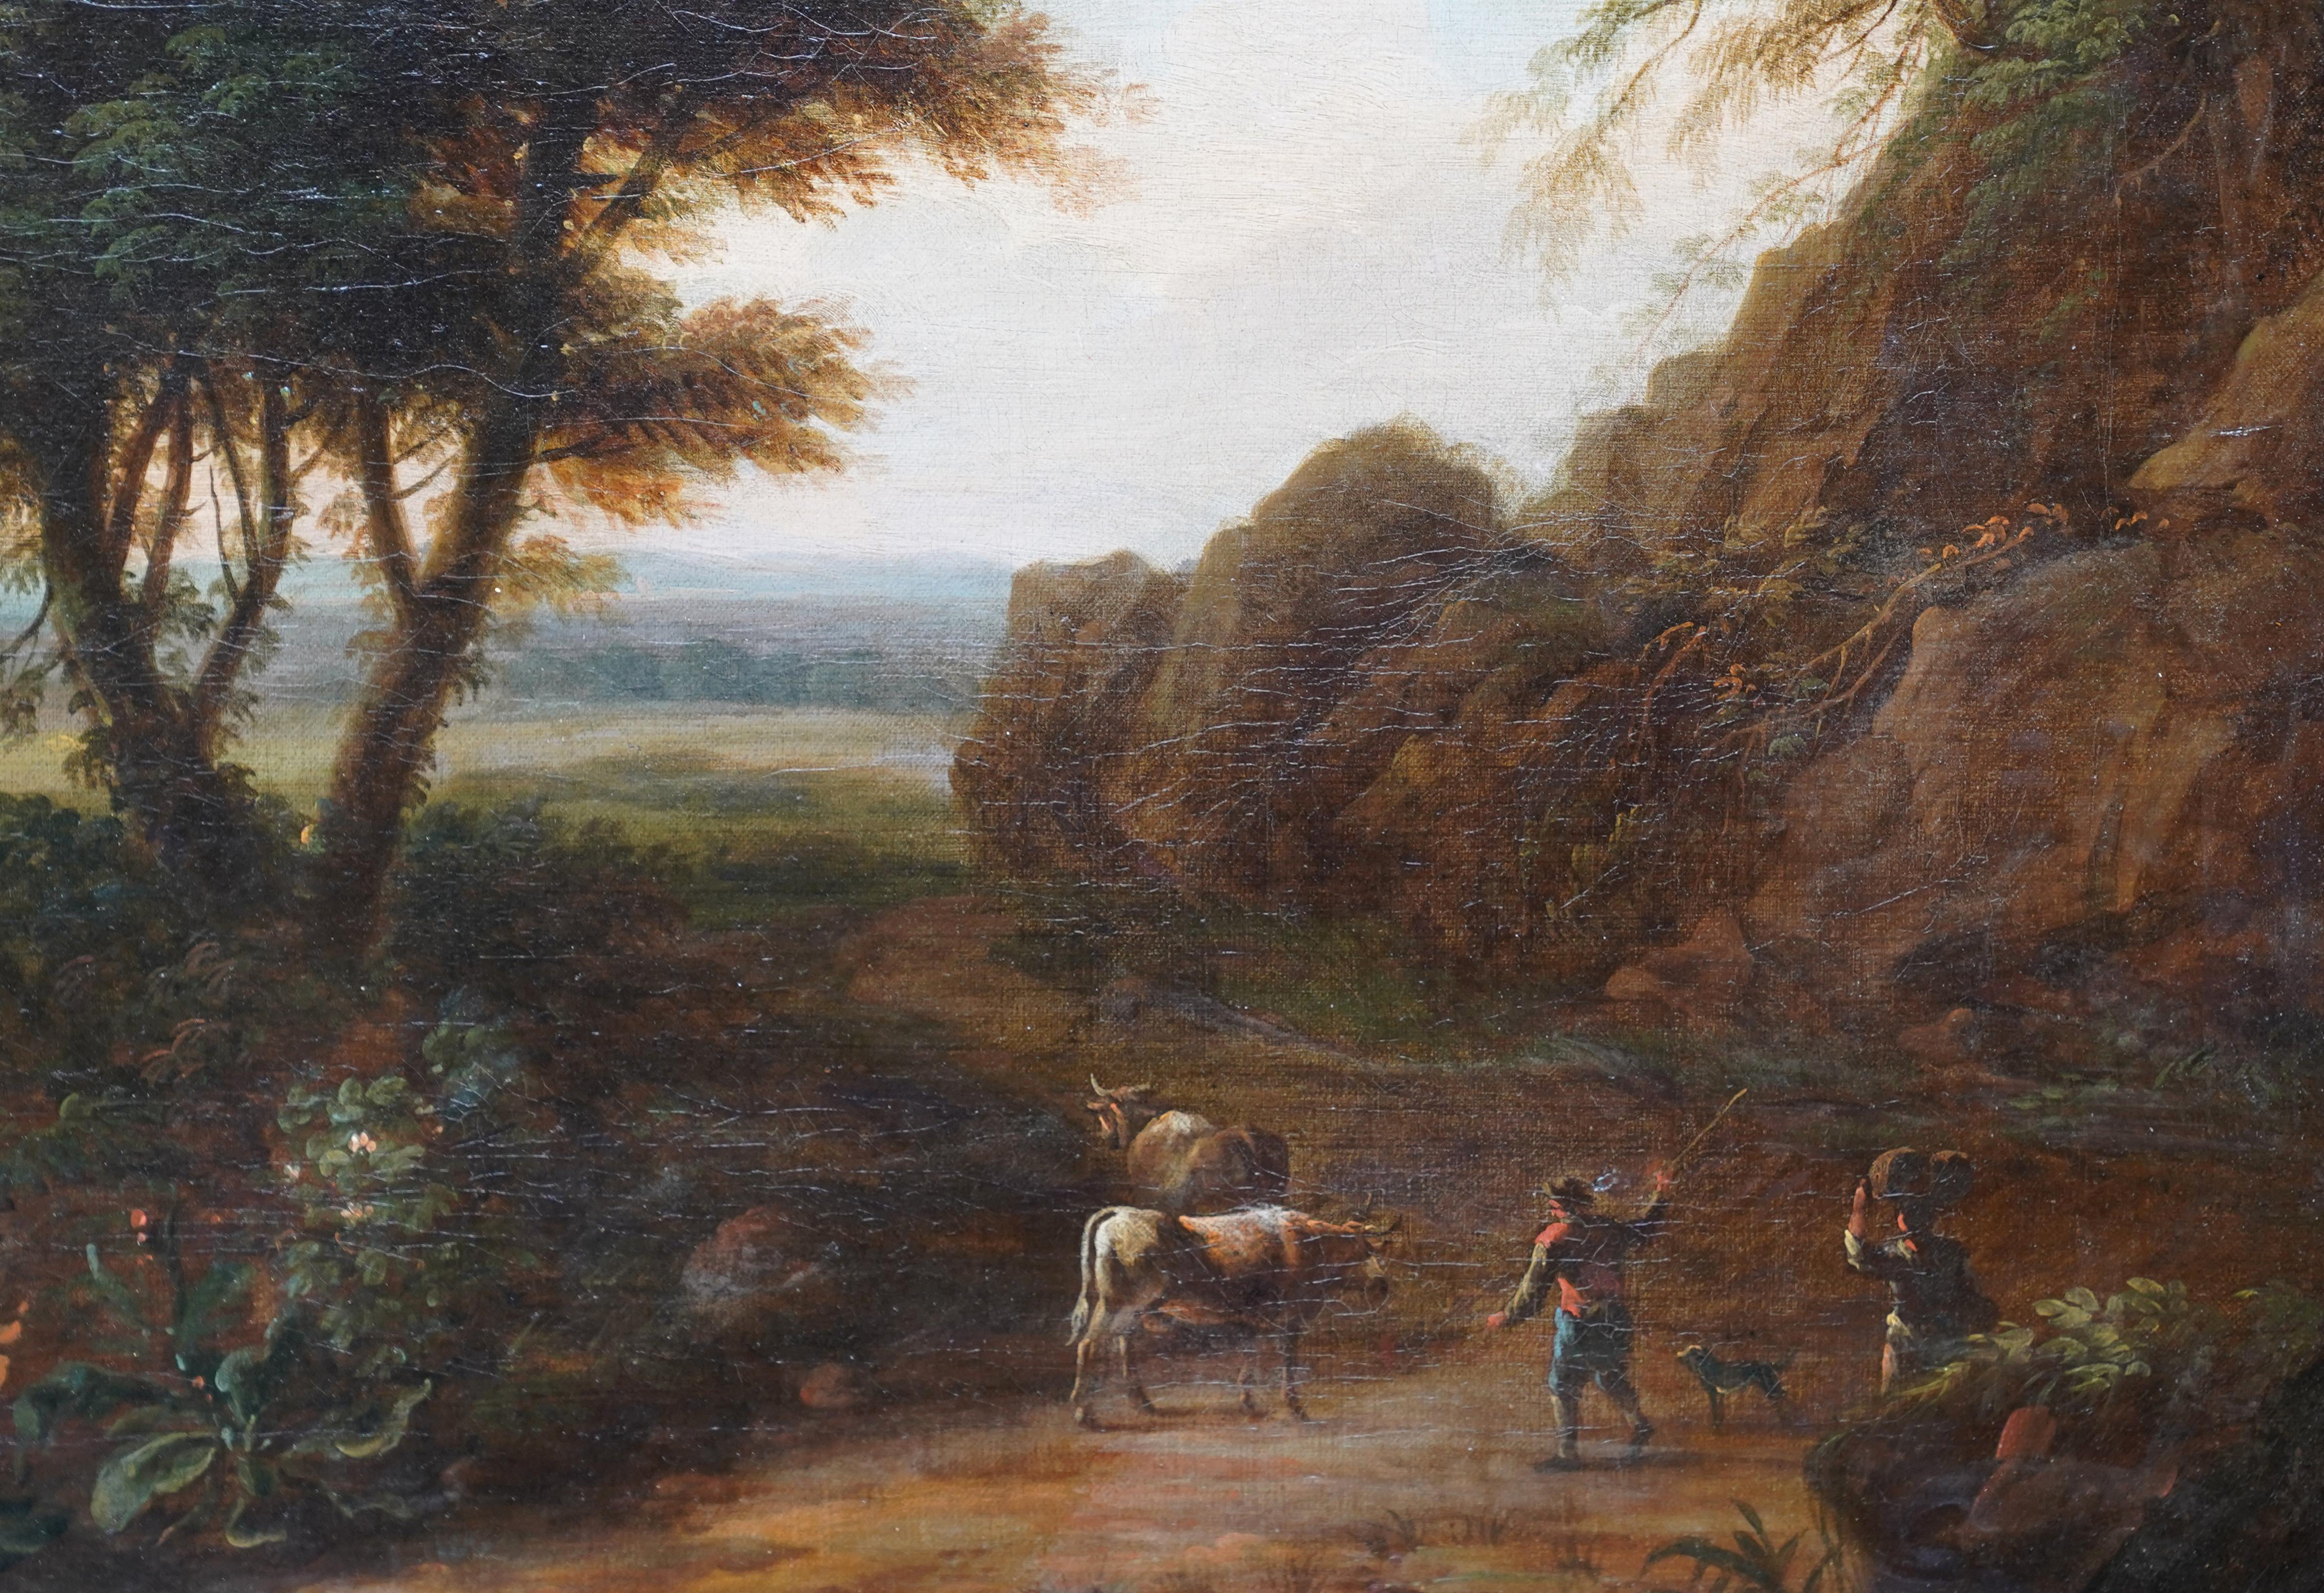 This simply stunning large Old Master landscape oil painting is attributed to noted Dutch artist Adriaen van Diest. Painted circa 1700 this Mediterranean Italian landscape painting has everything; A really interesting landscape with land, river, sea